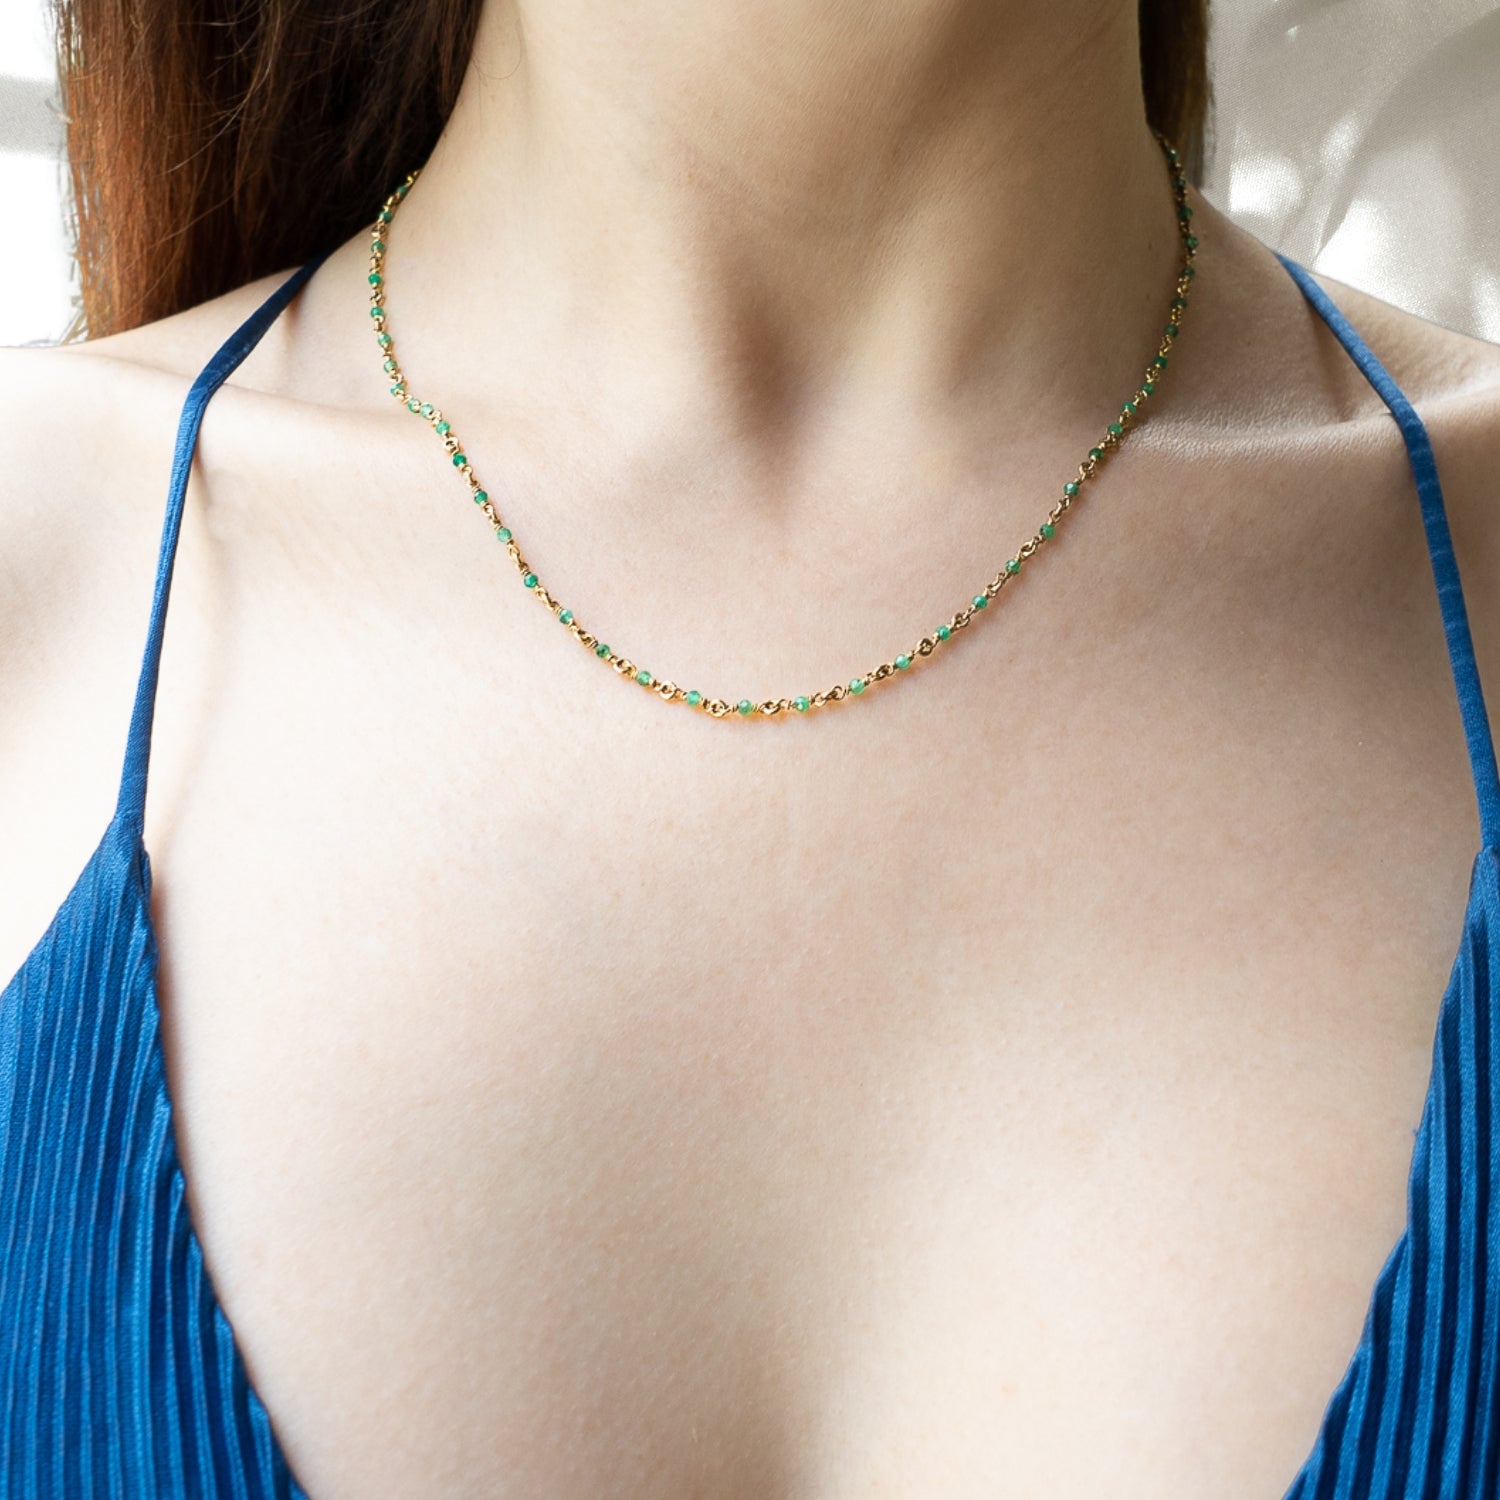 Another image of a model wearing the Karya Jade Gold Necklace, highlighting its eye-catching design and the beauty of the natural stones.